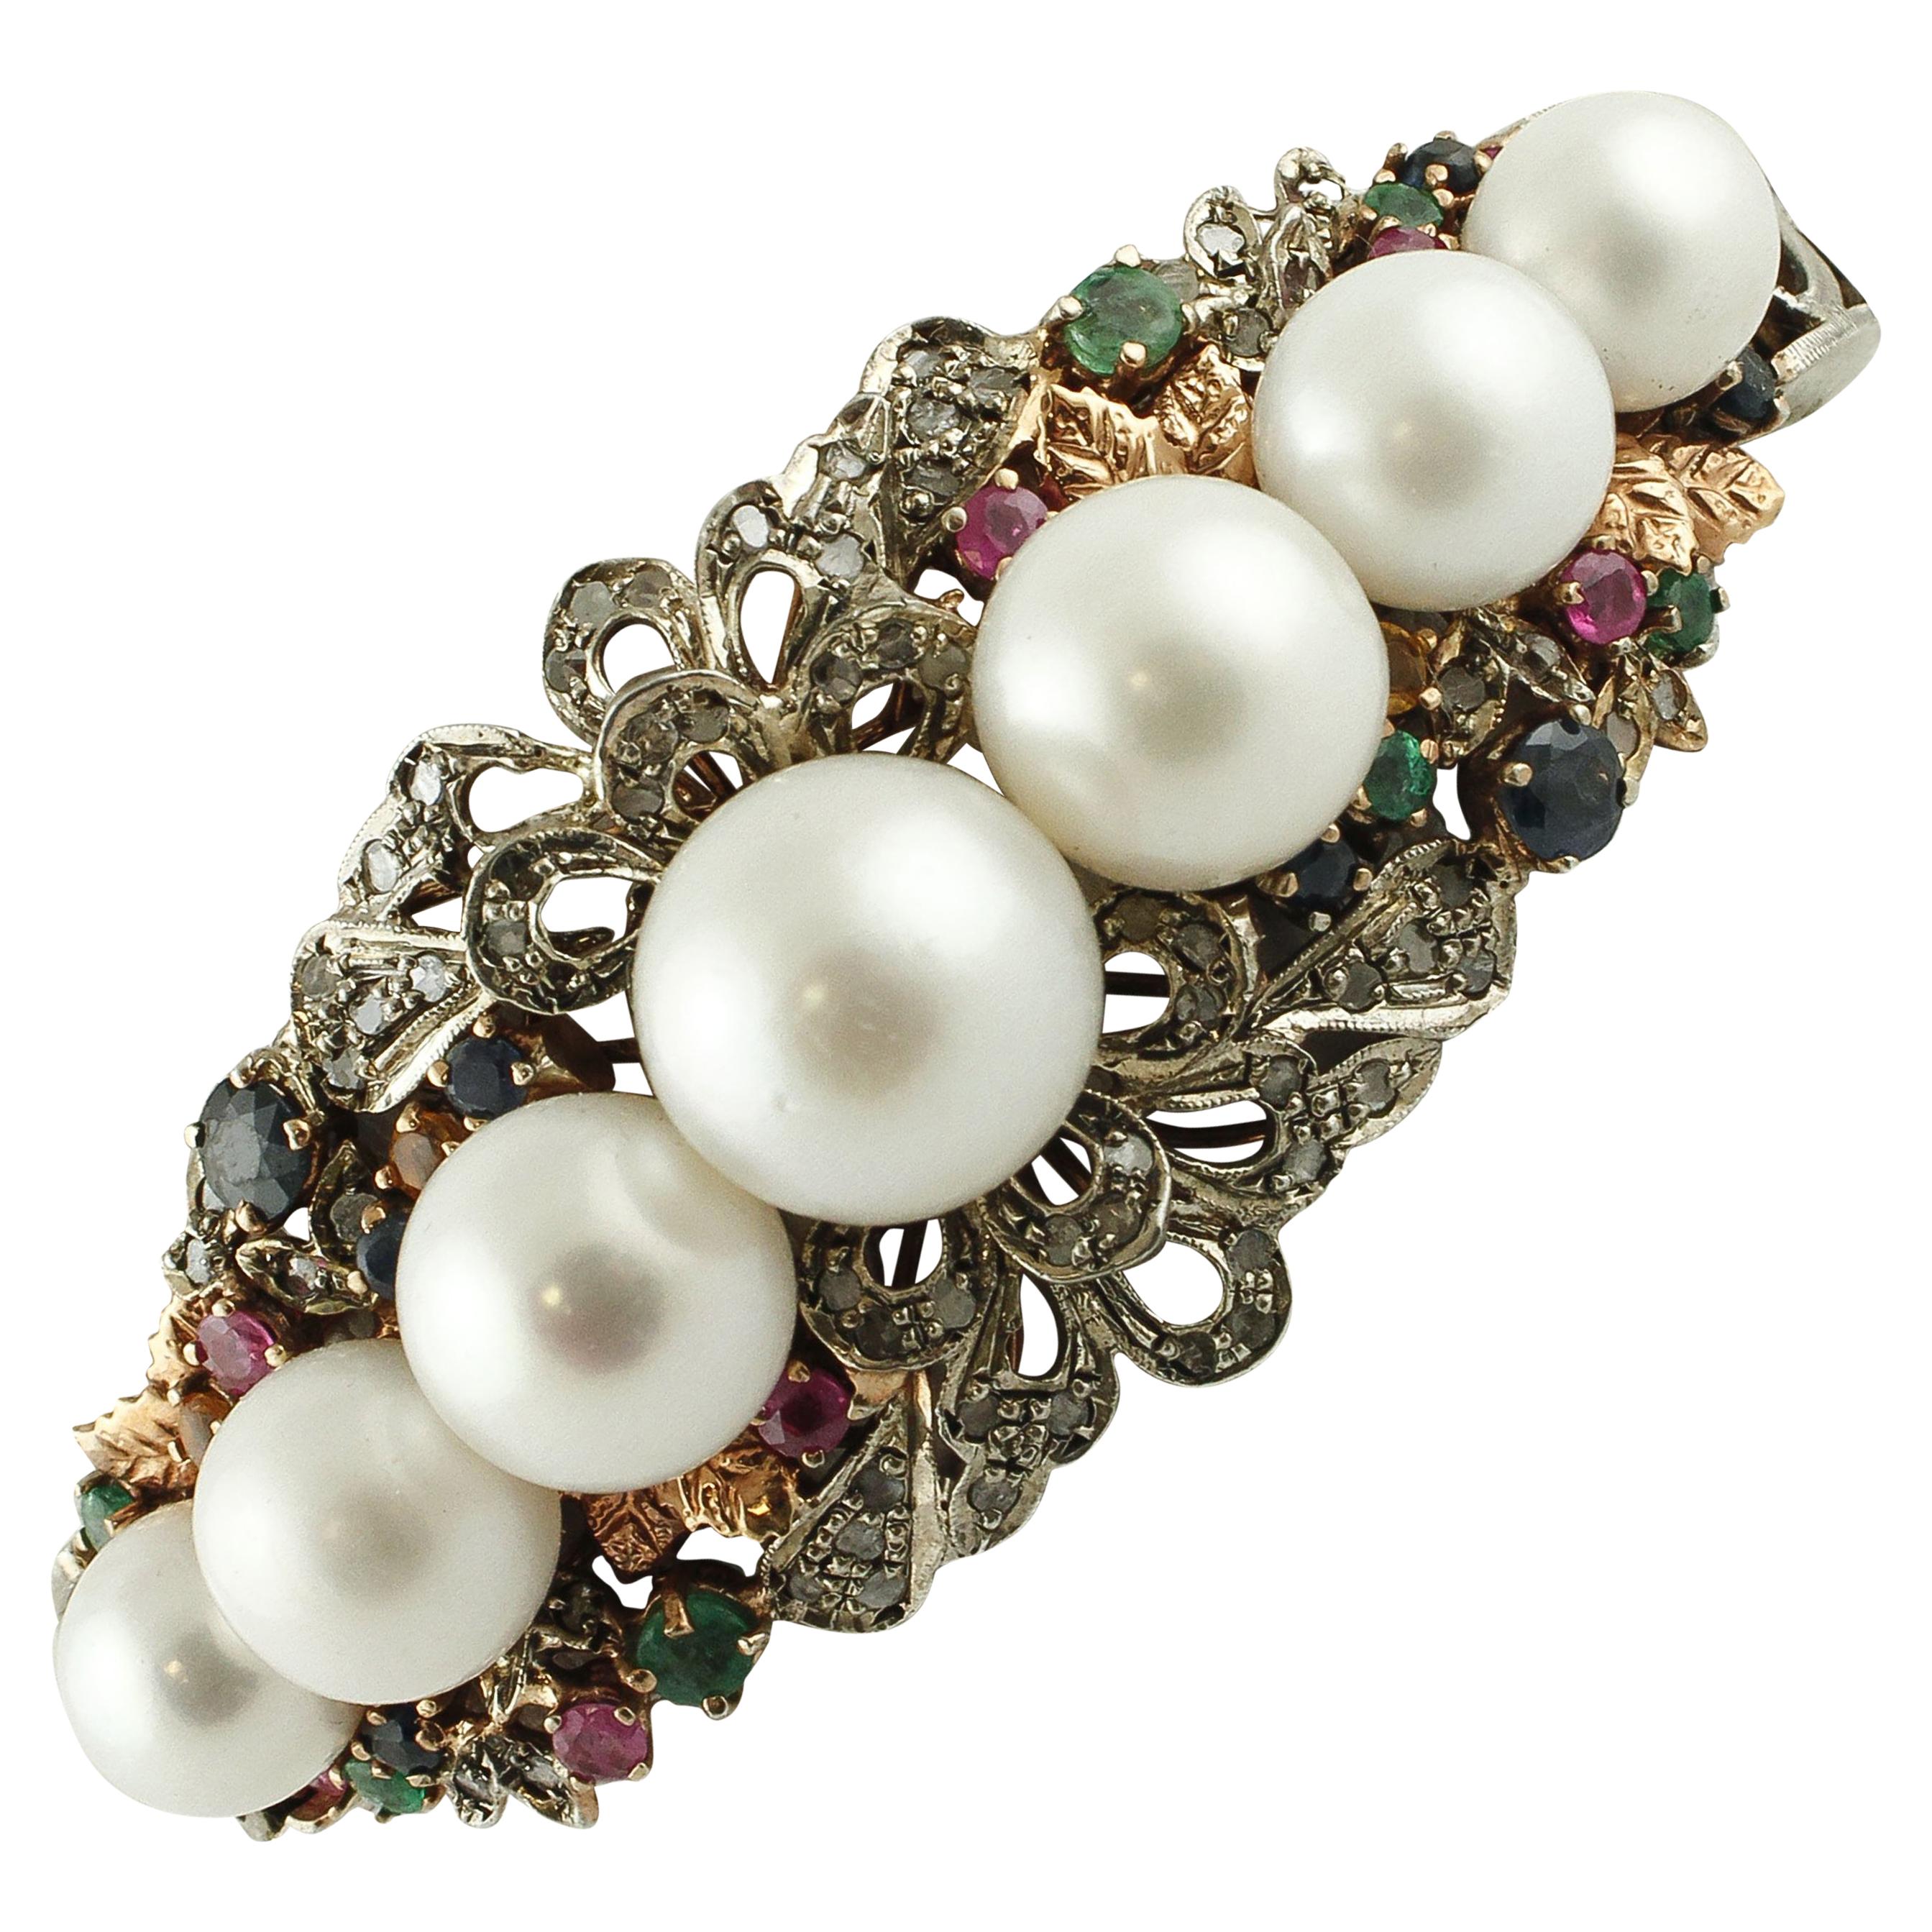 Diamonds Rubies Emeralds Sapphires Pearls Rose Gold and Silver Rigid Bracelet For Sale